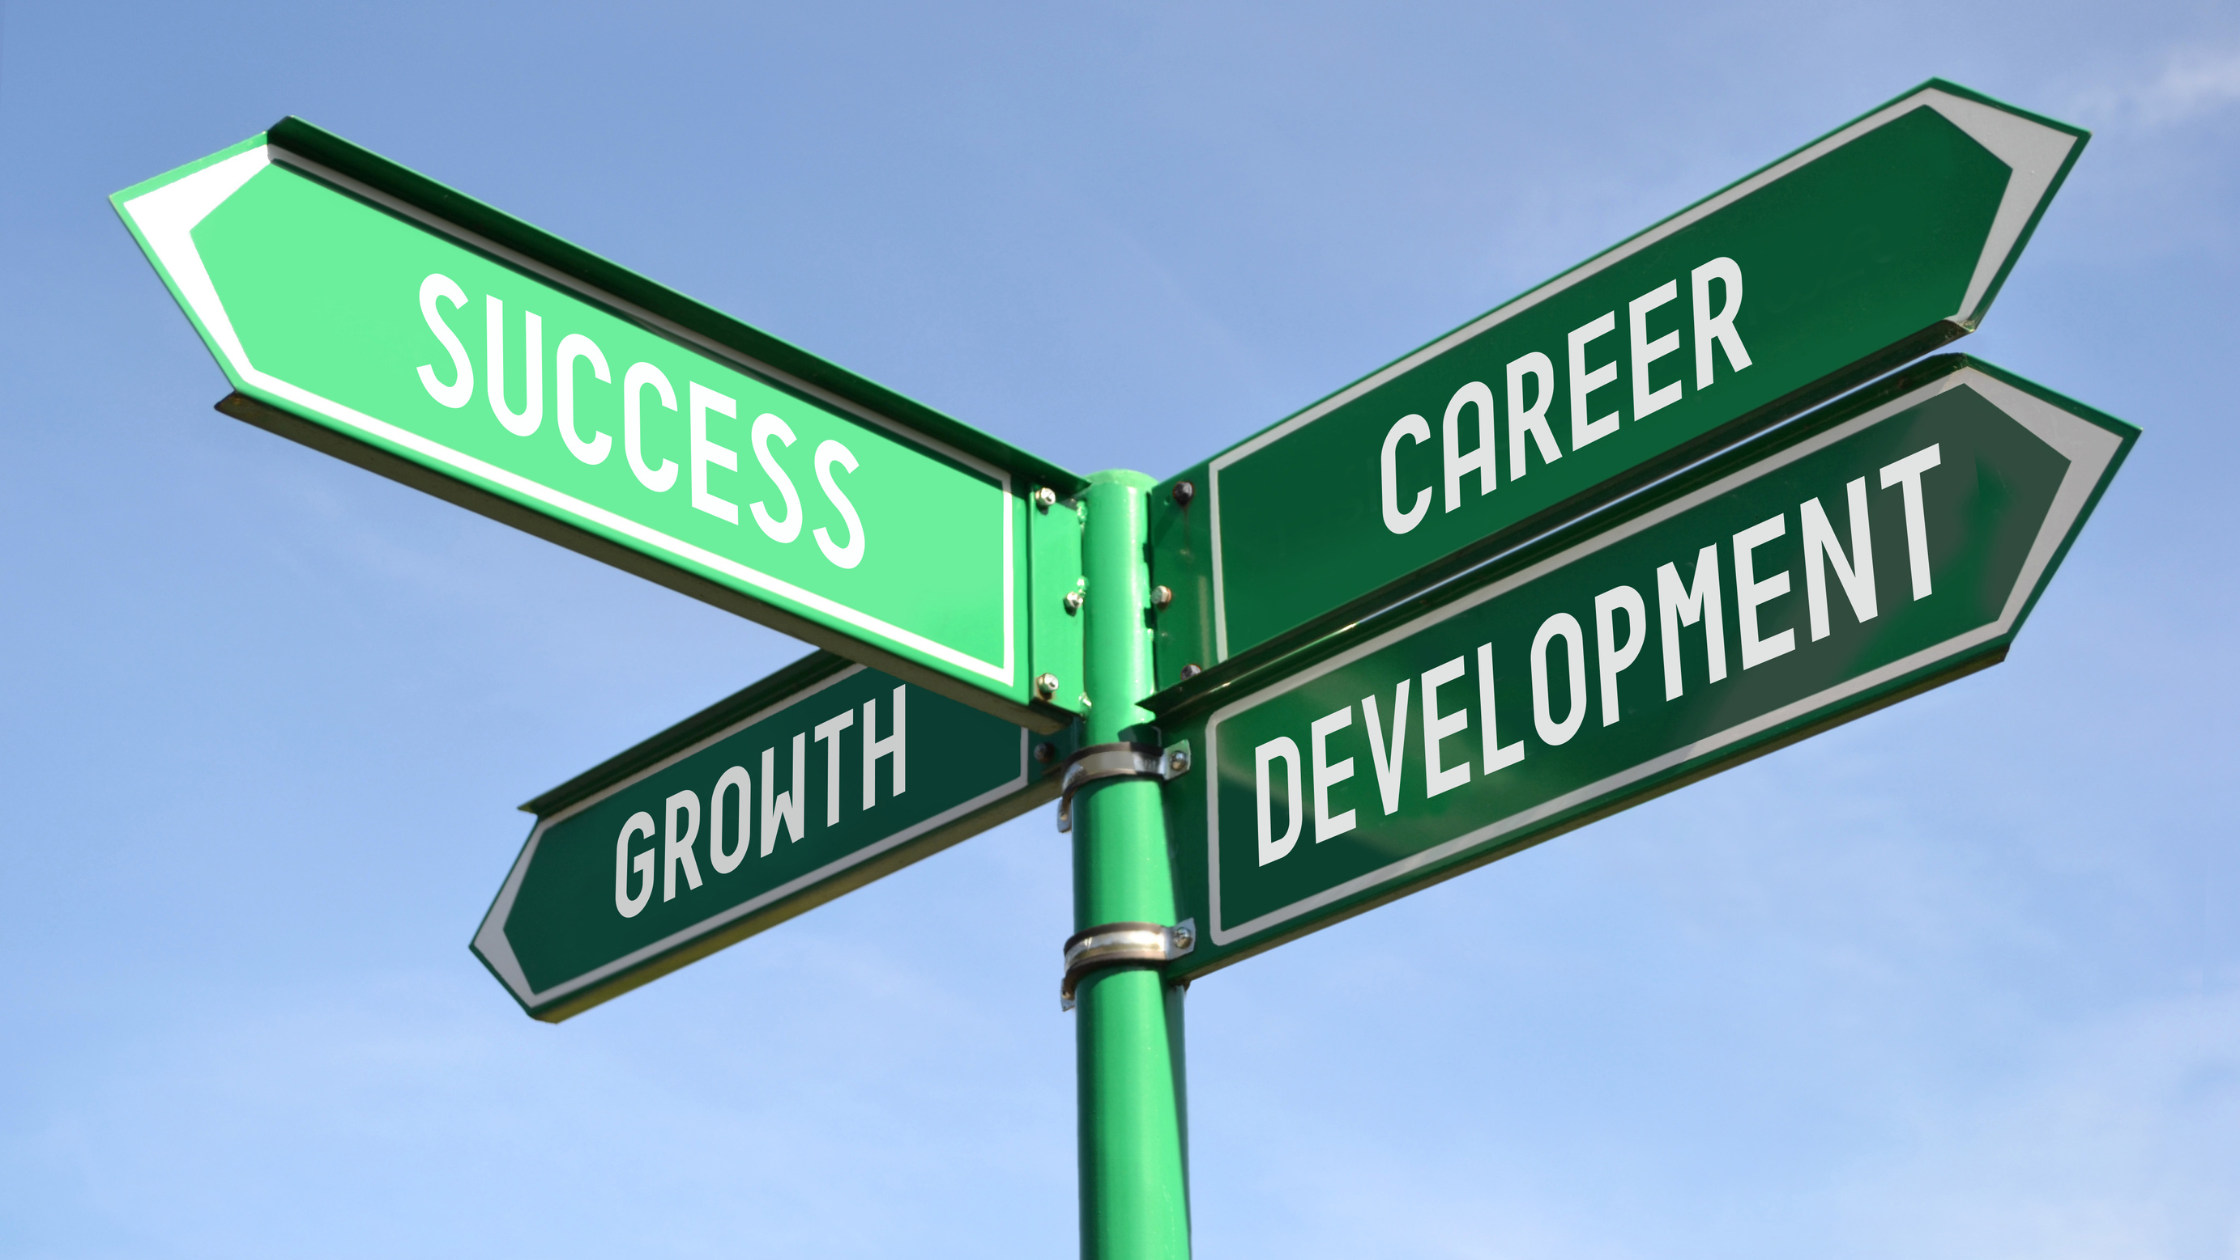 A road sign showing the different directions for paralegal career, growth, success, and development.